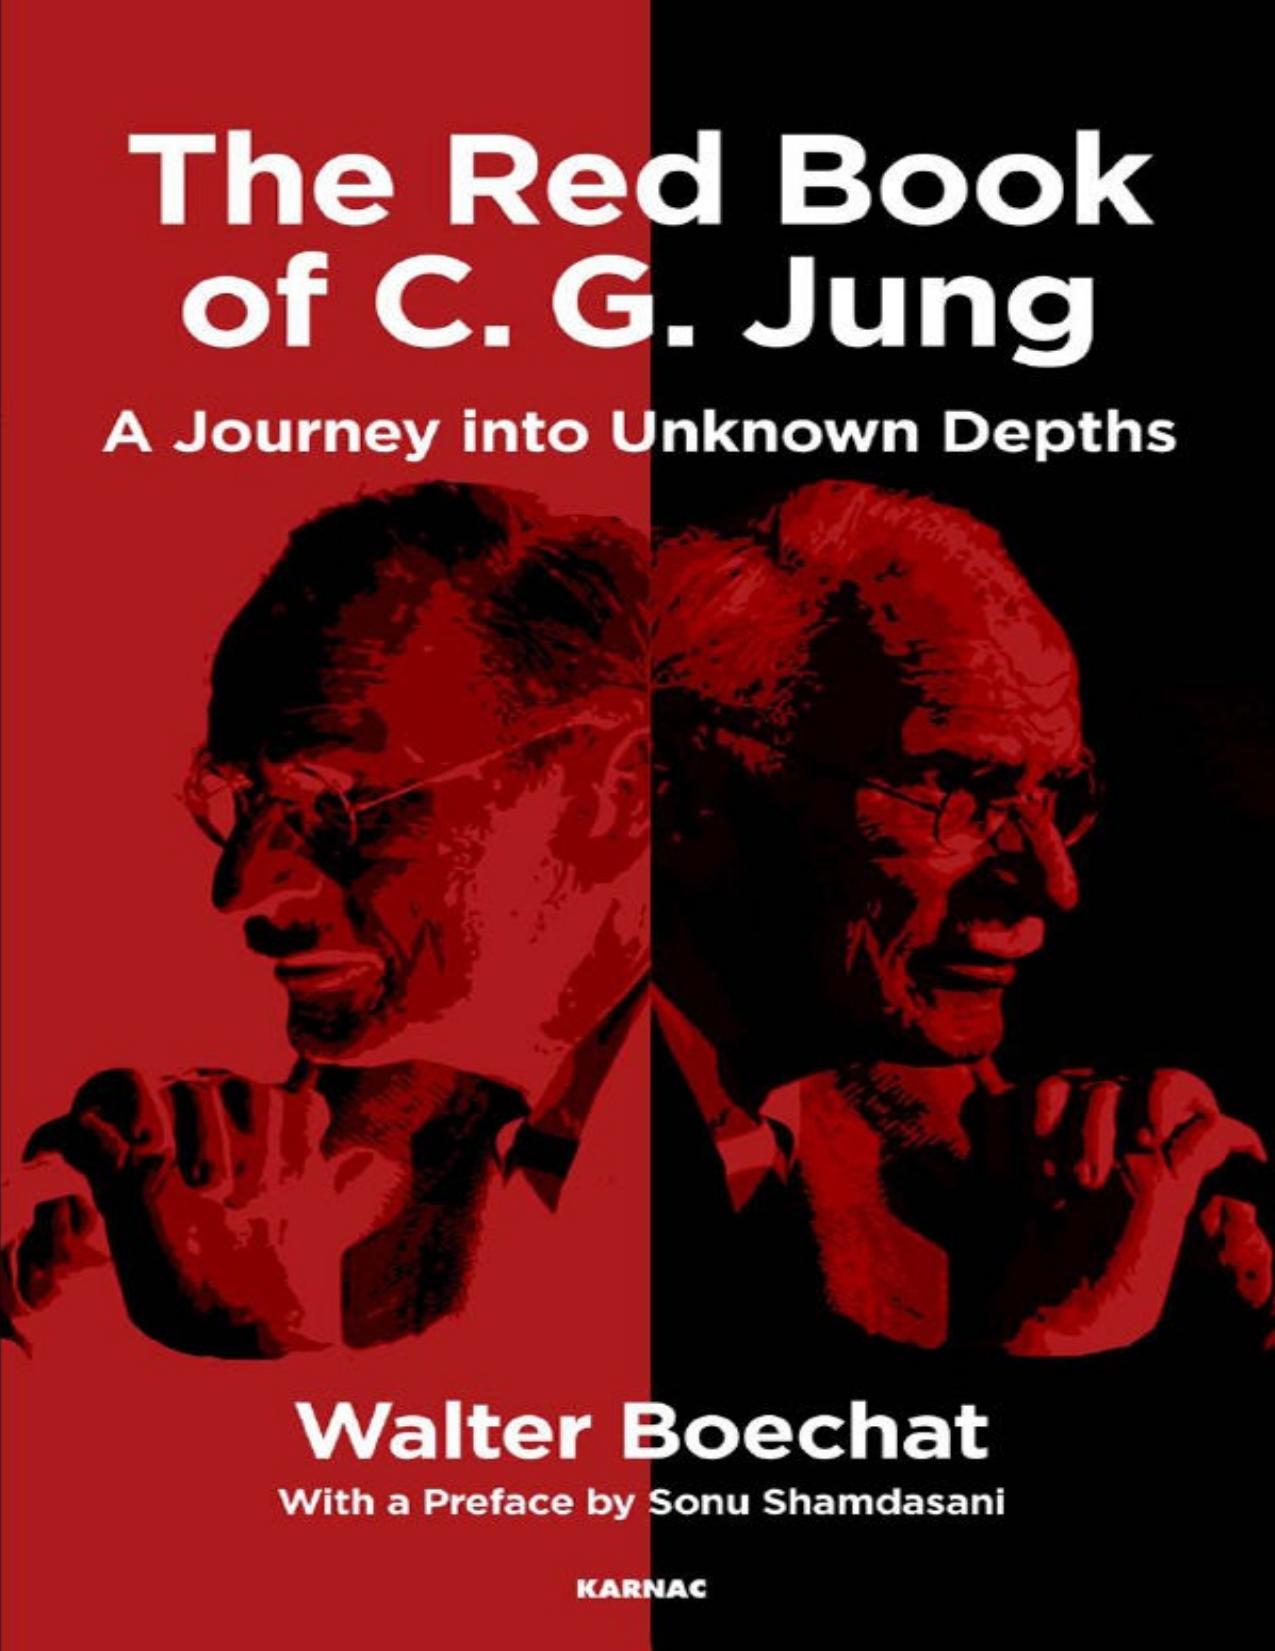 The Red Book of C.G. Jungl; A Journey into Unknown Depths by Walter Boechat